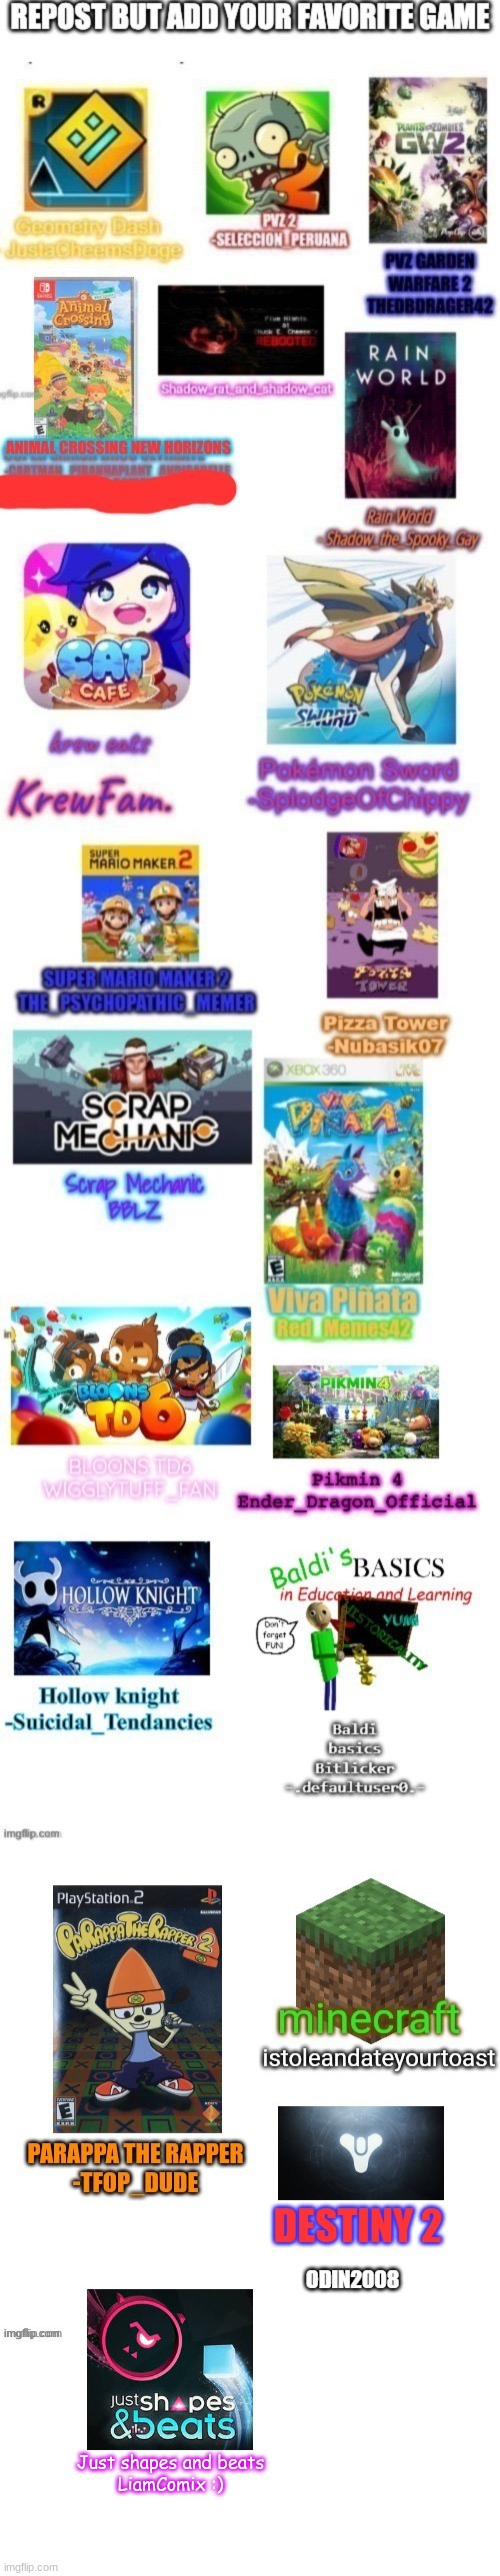 more like my #2 favorite game, #1 is gd but that's already taken :P | Just shapes and beats
LiamComix :) | image tagged in repost,gaming | made w/ Imgflip meme maker